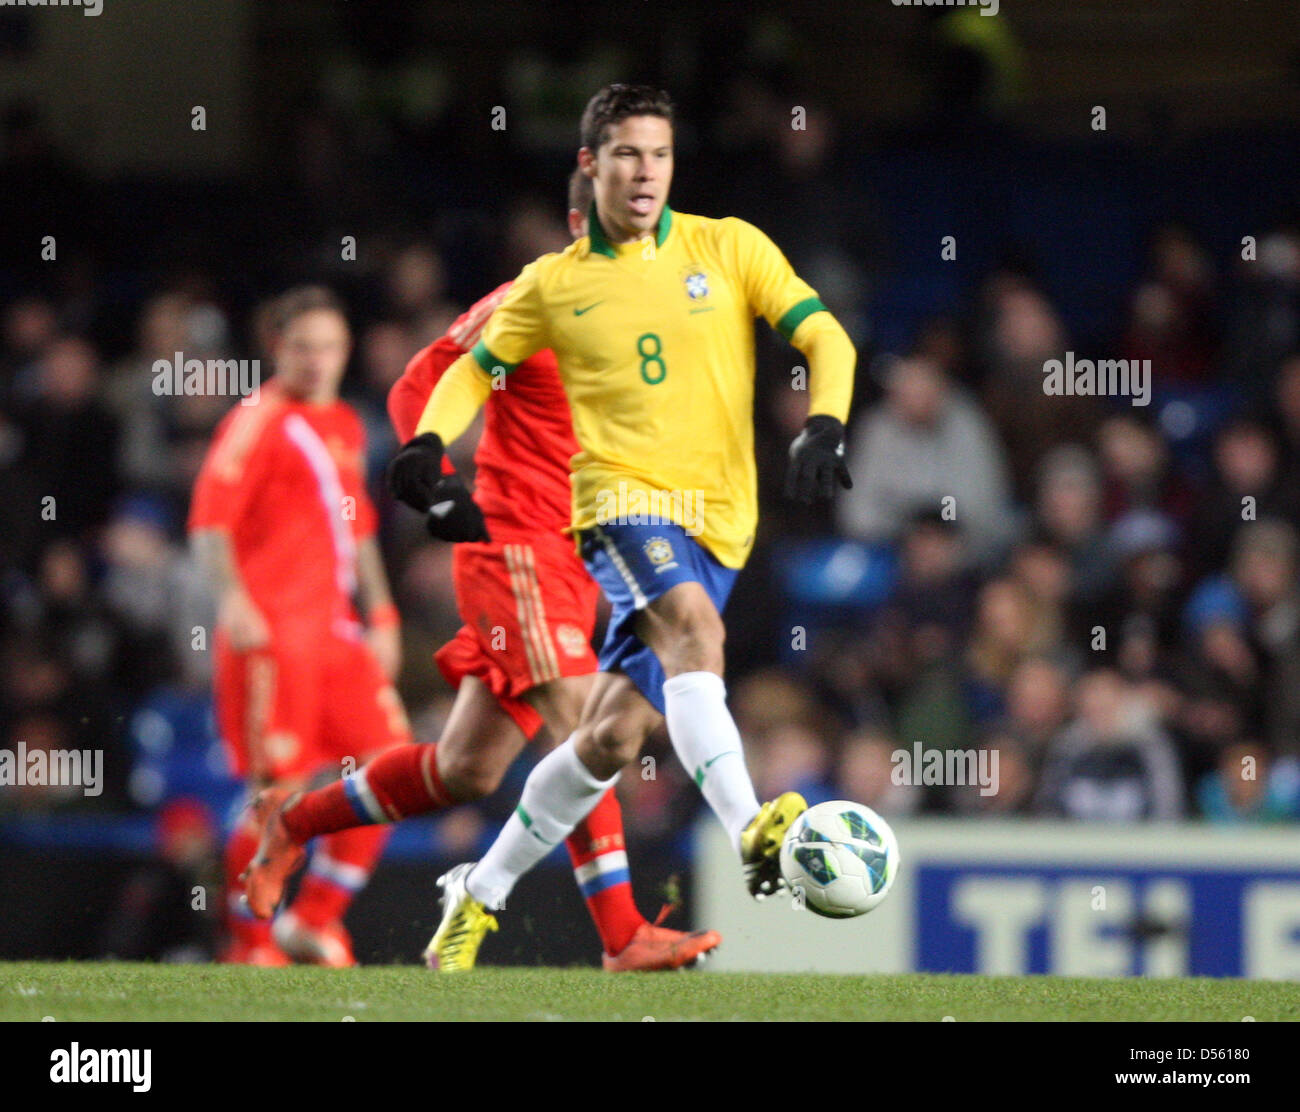 London, UK. 25th March 2013. Hernanes of Brazil during the International Friendly between Brazil and Russia from the Stamford Bridge. Credit: Action Plus Sports Images / Alamy Live News Stock Photo